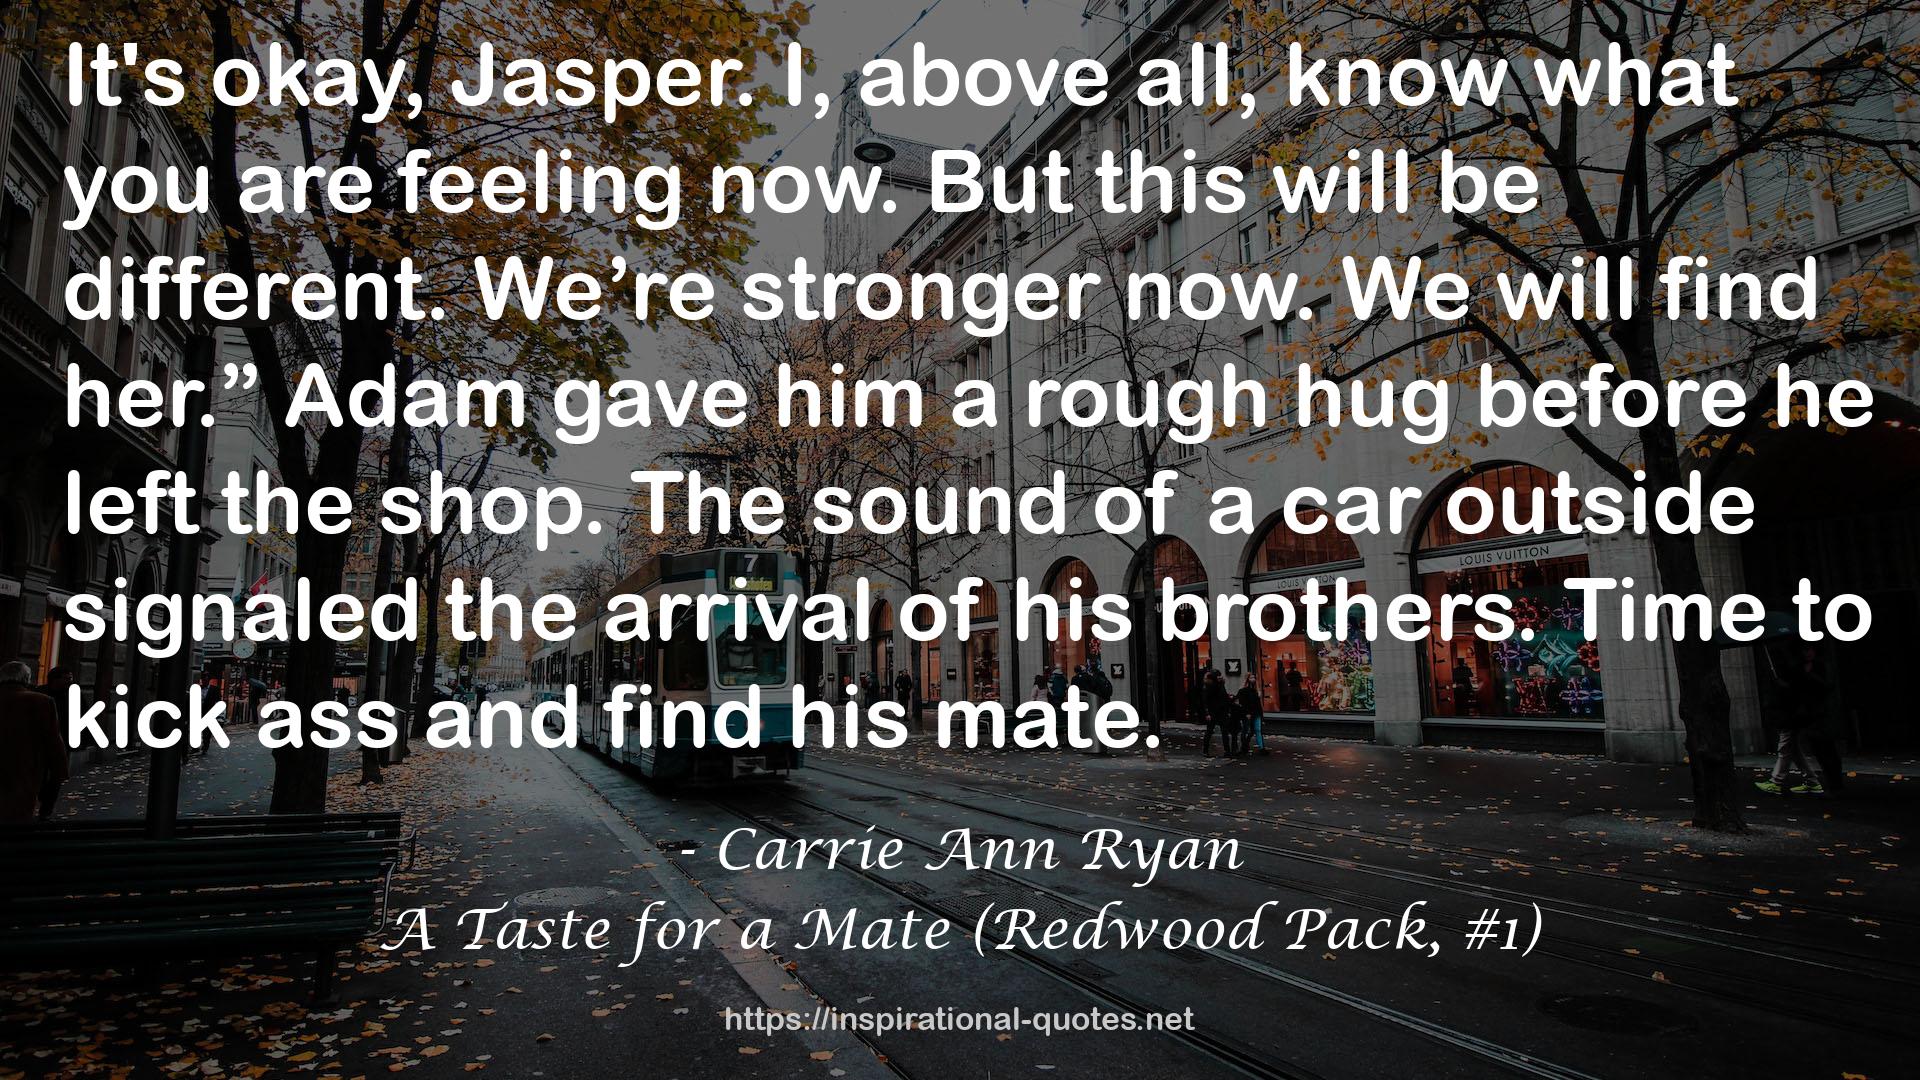 A Taste for a Mate (Redwood Pack, #1) QUOTES